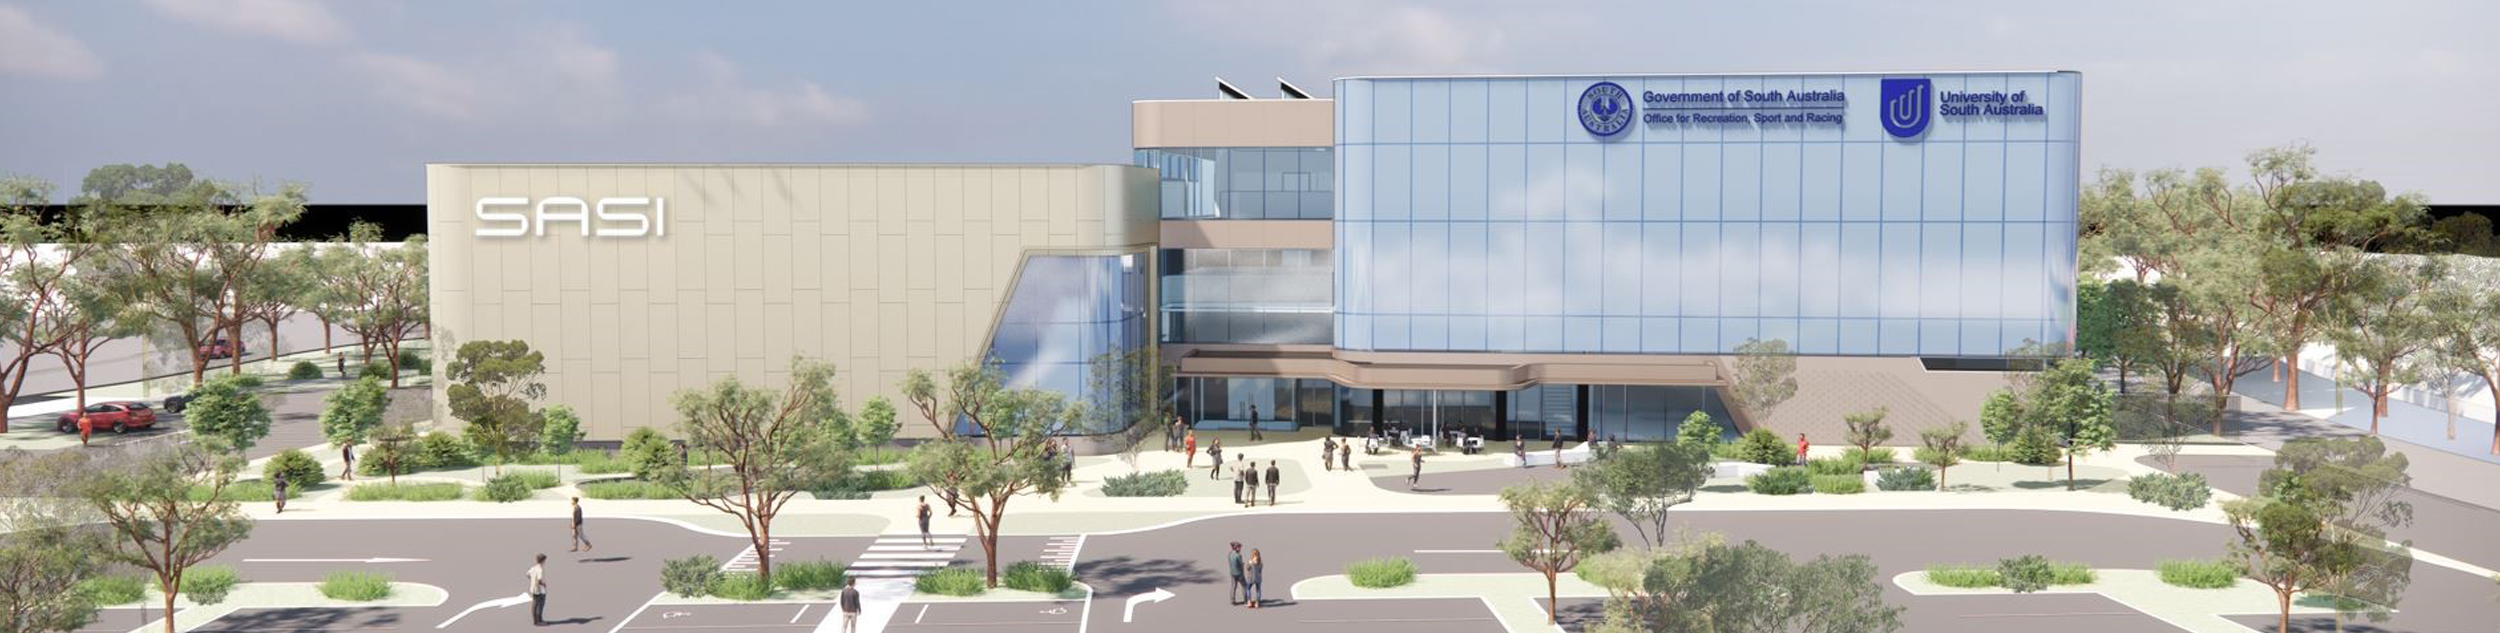 Architectural render of the new SASI building